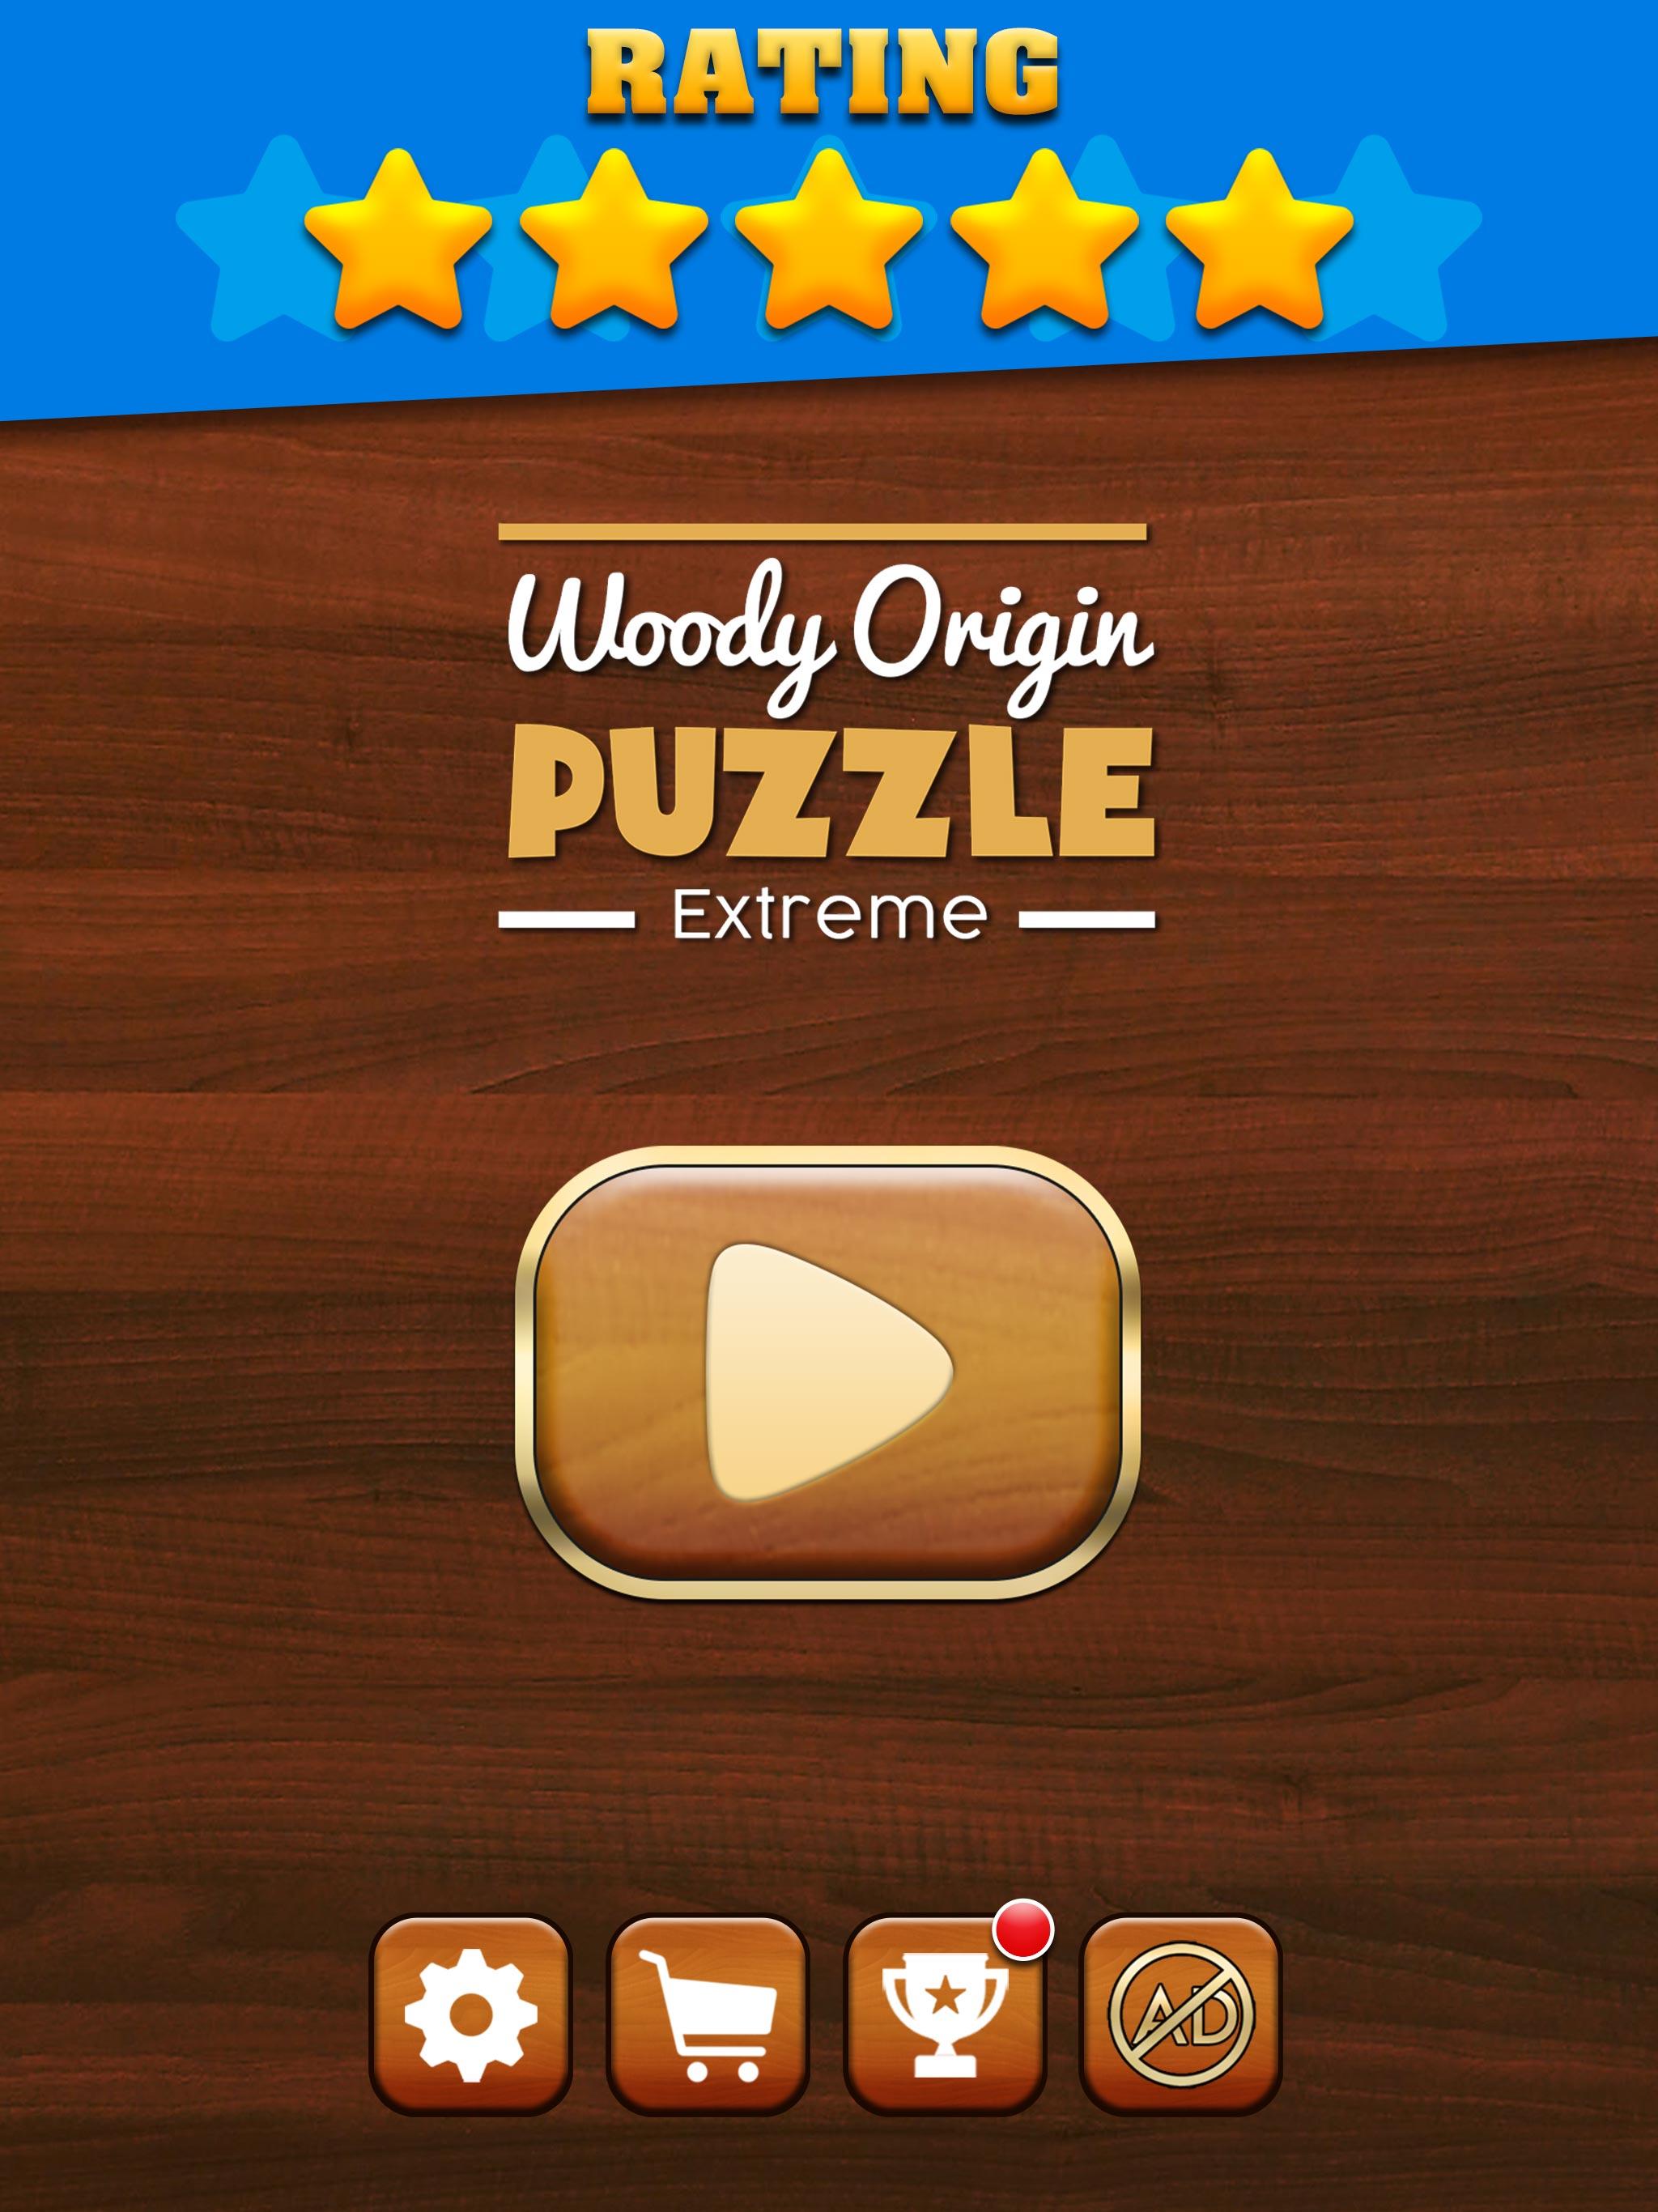 Woody Extreme: Wood Block Puzzle Games for free 2.4.0 Screenshot 14